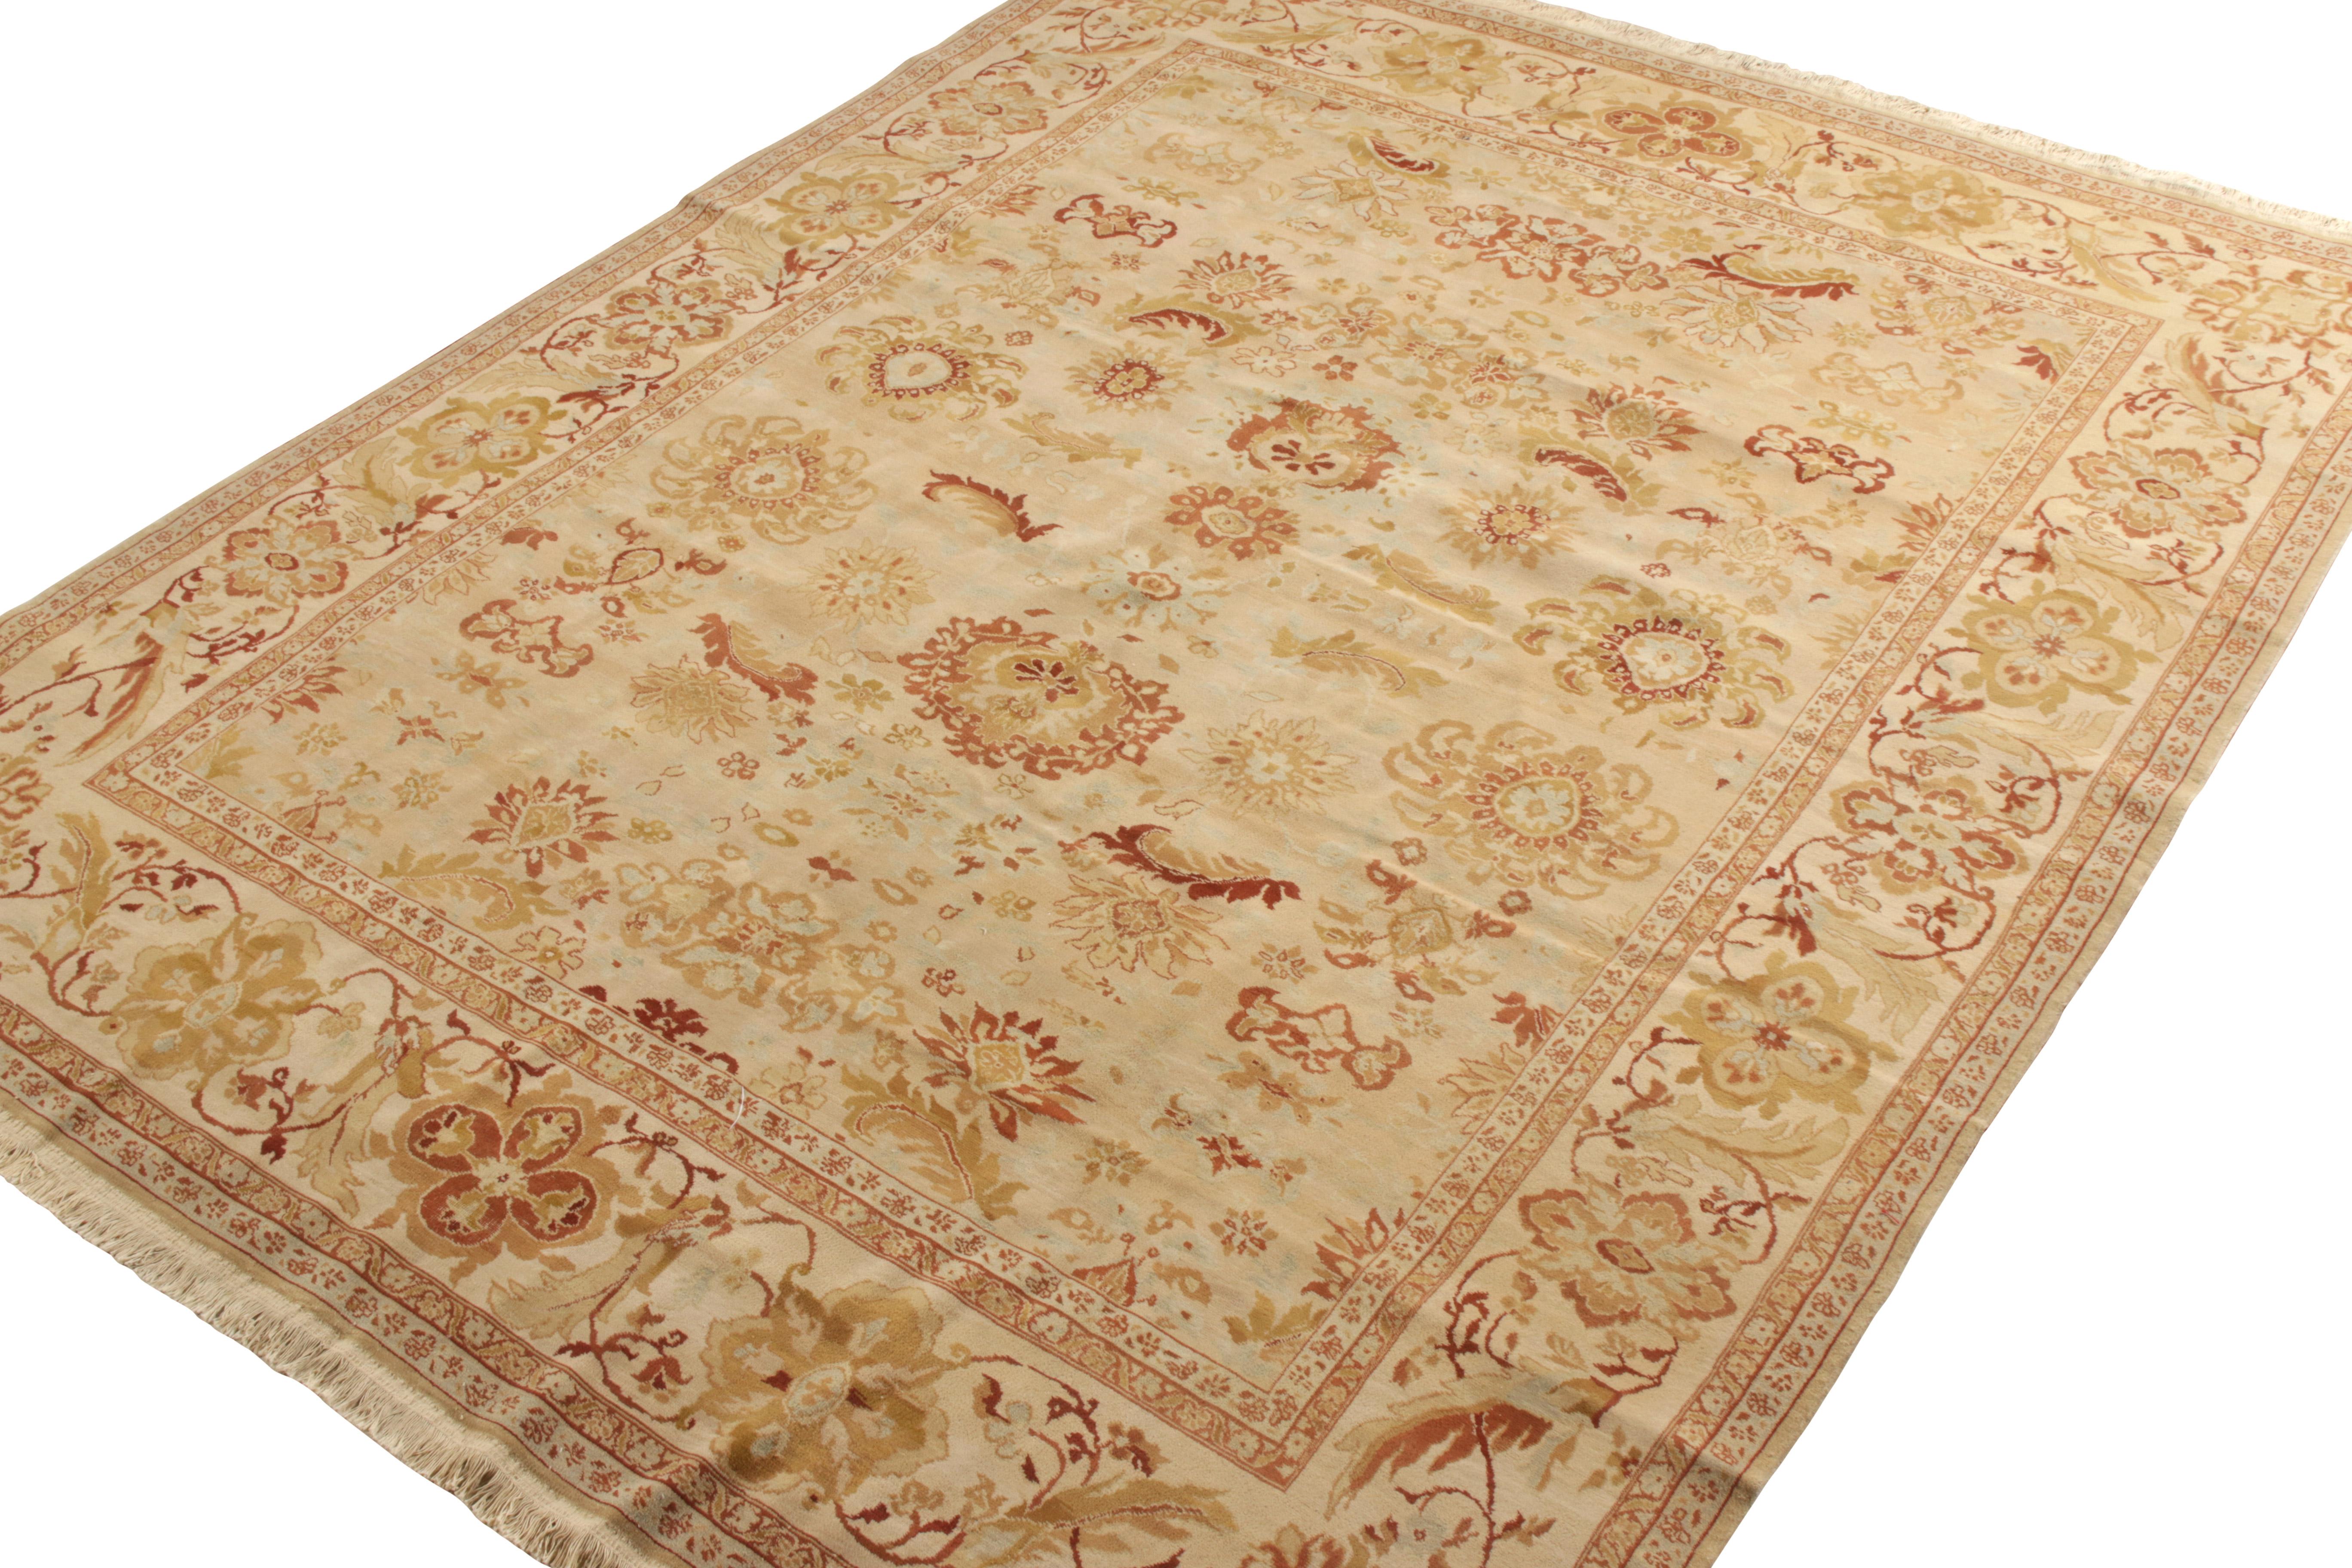 Chinese Rug & Kilim’s Sultanabad Style Rug in Beige-Brown, Red Floral Pattern For Sale